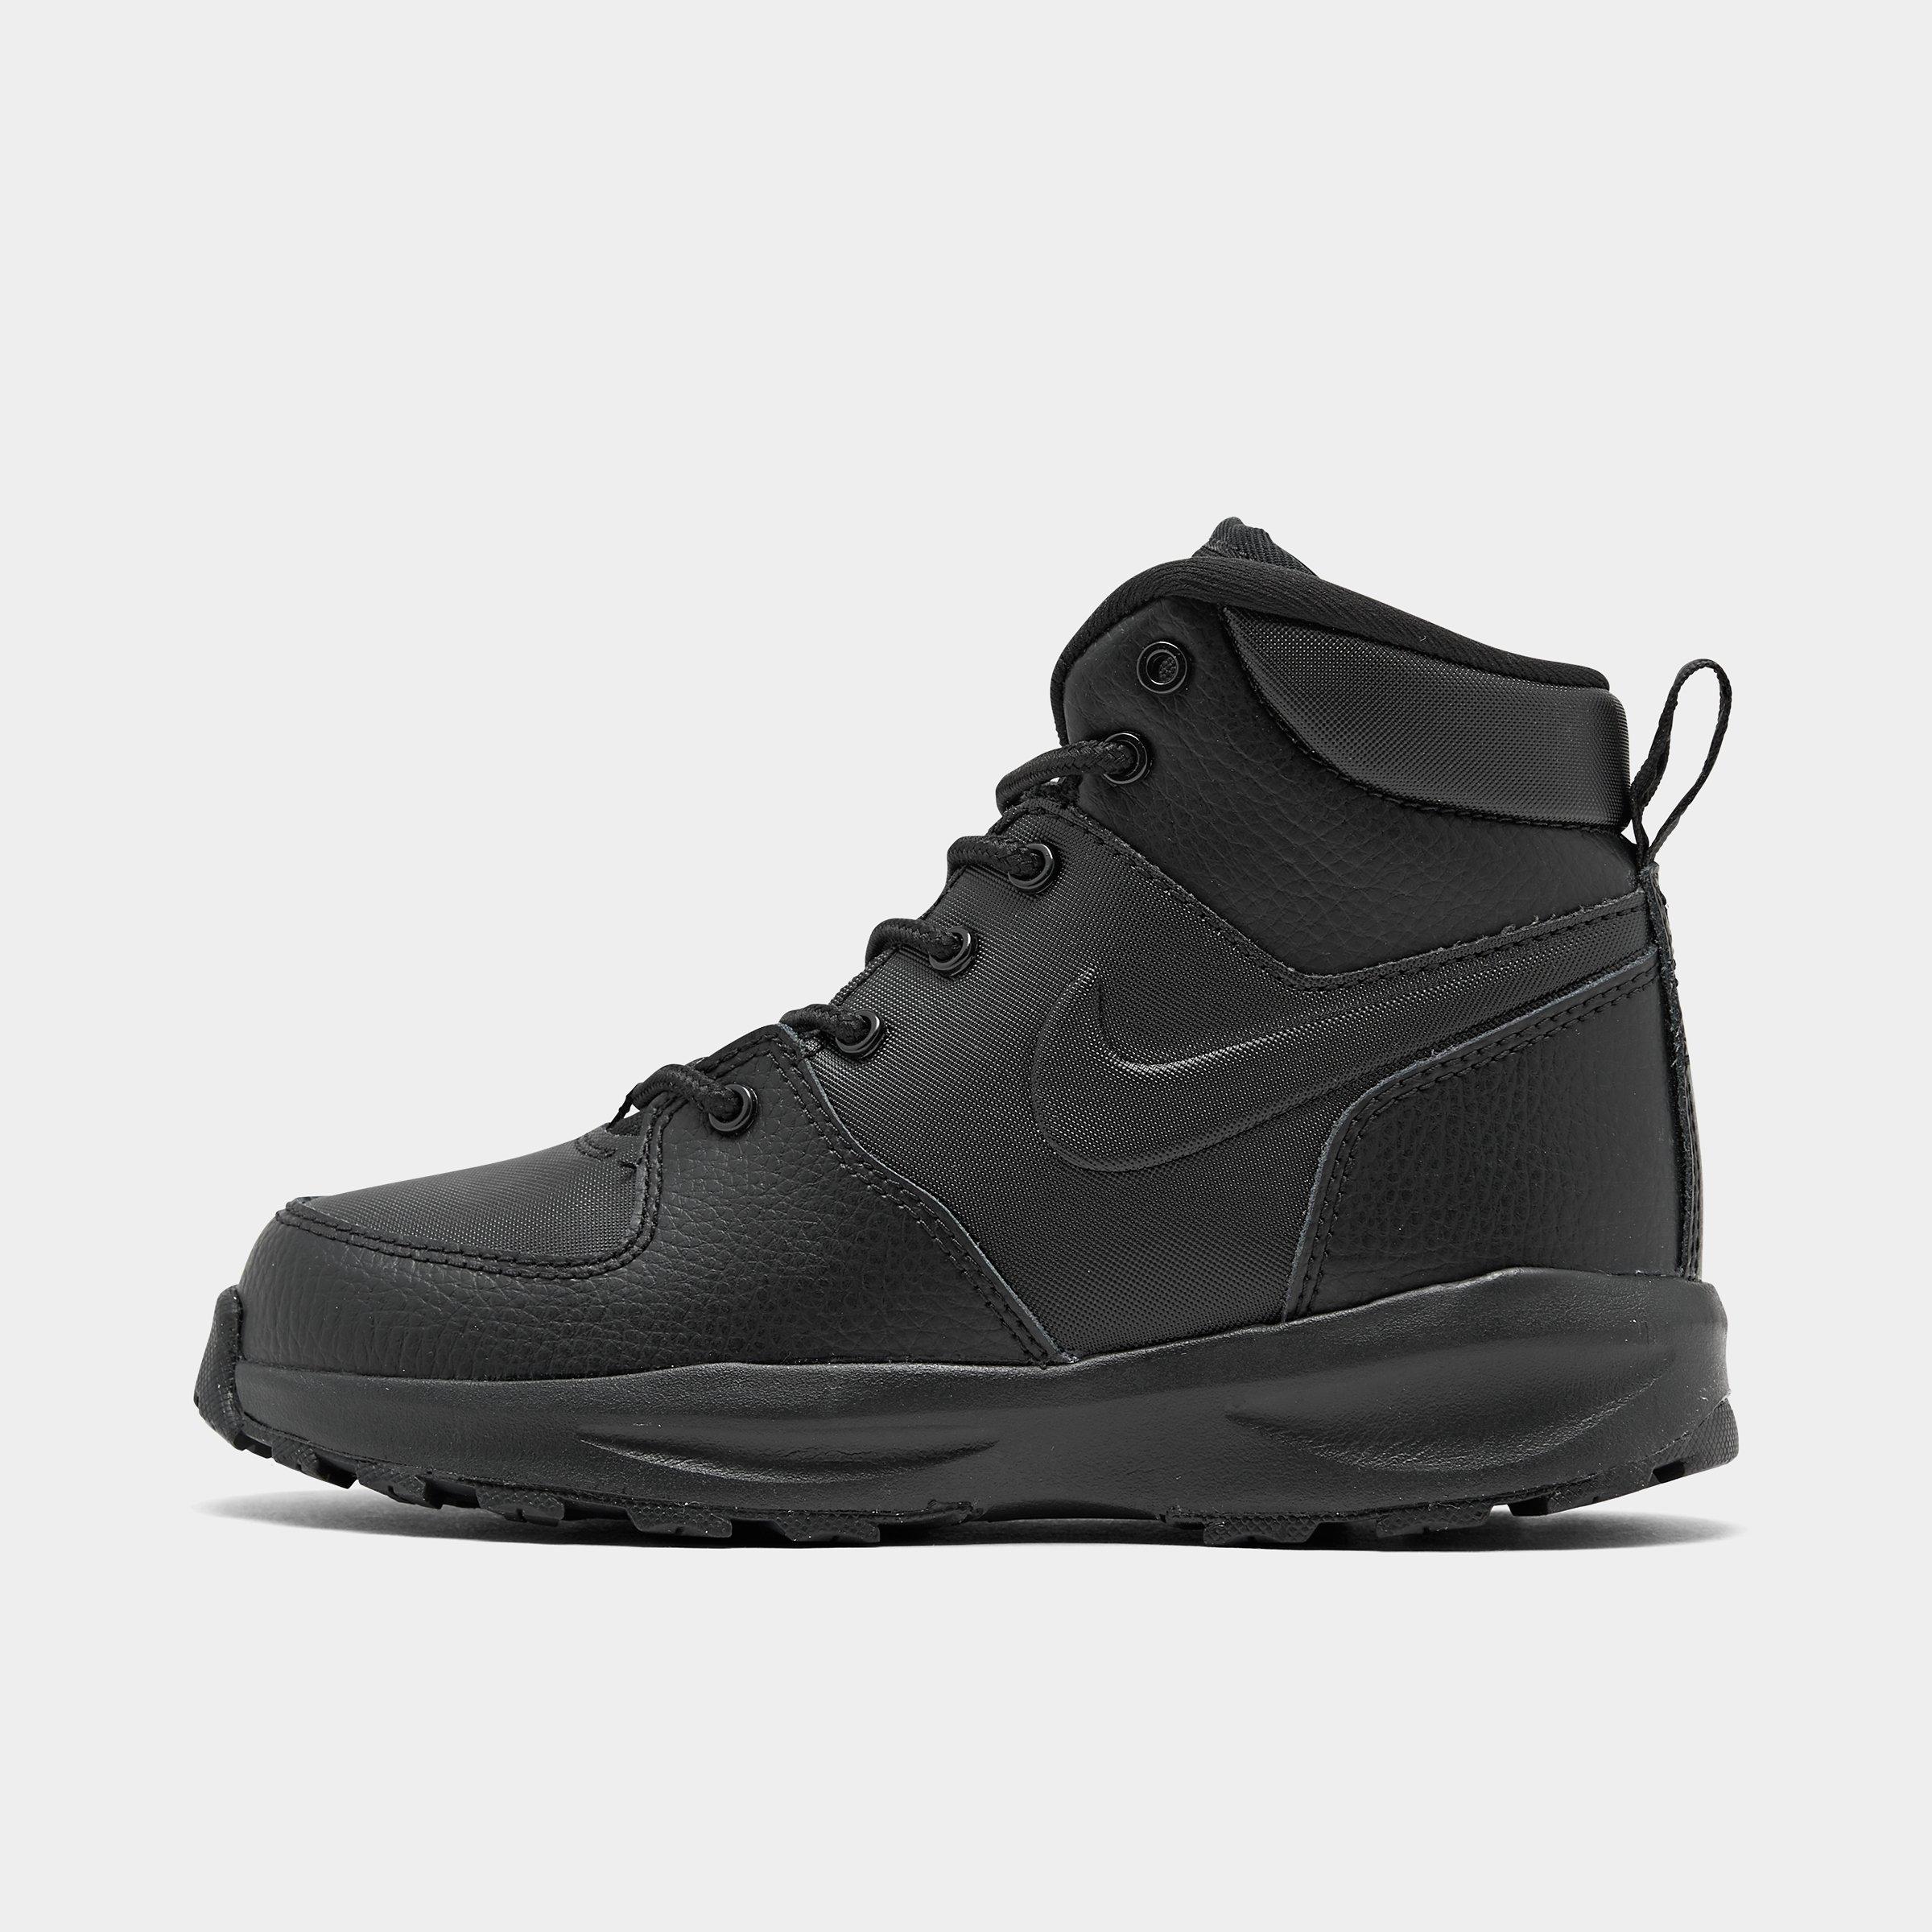 acg boots on sale